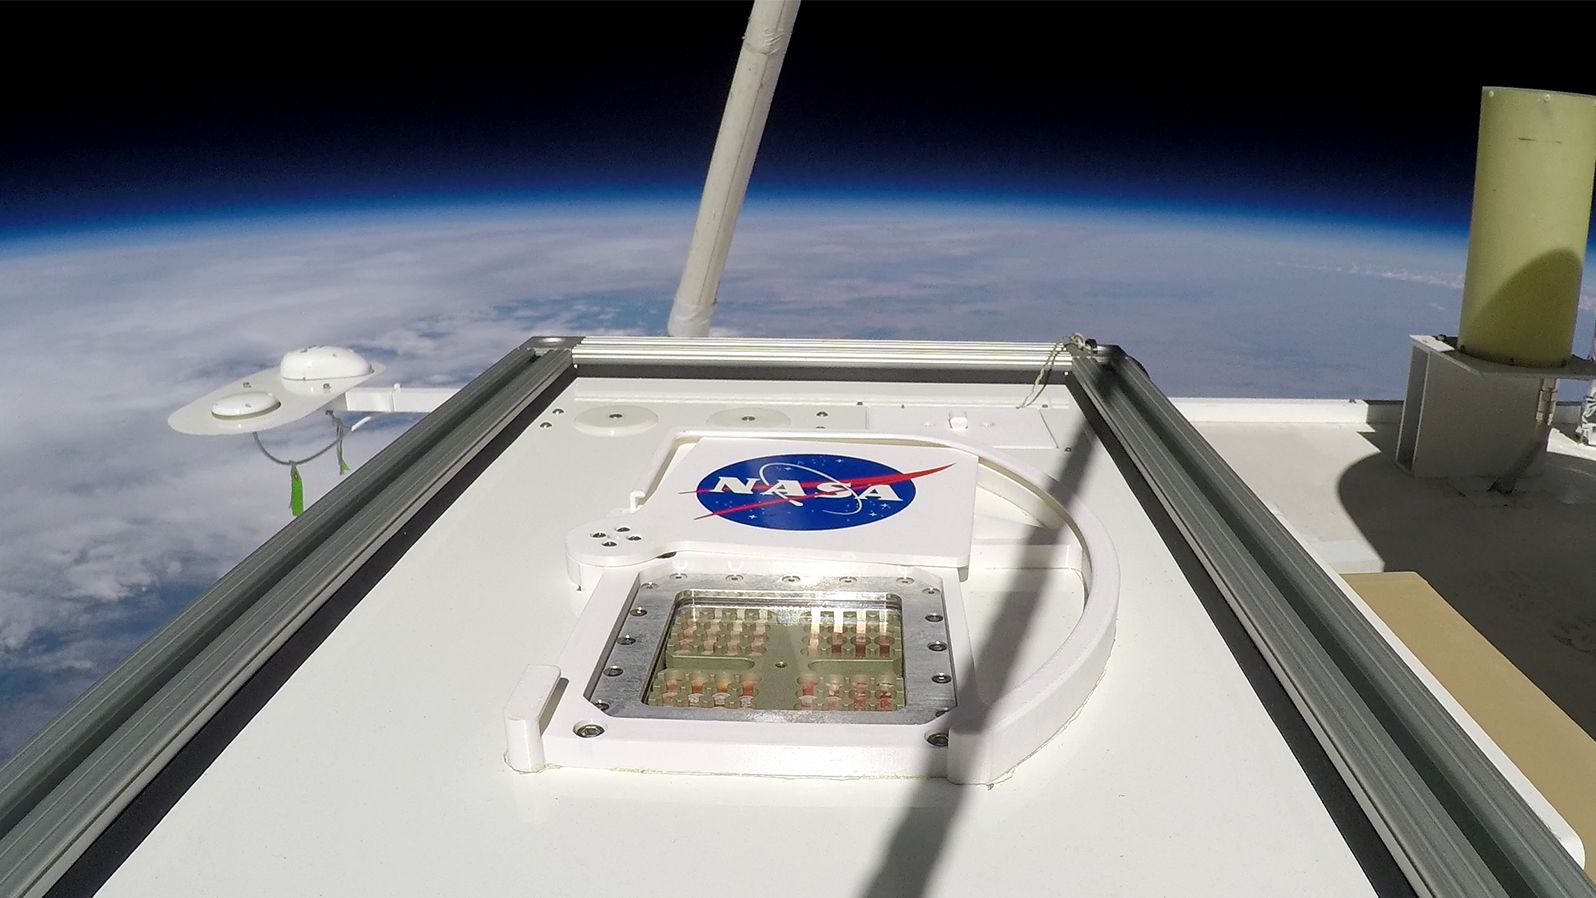 The MARSBOx took flight in September 2019. Its door rotated open, exposing samples of four different types of microorganisms to the extreme environmental conditions of the Earth's stratosphere.